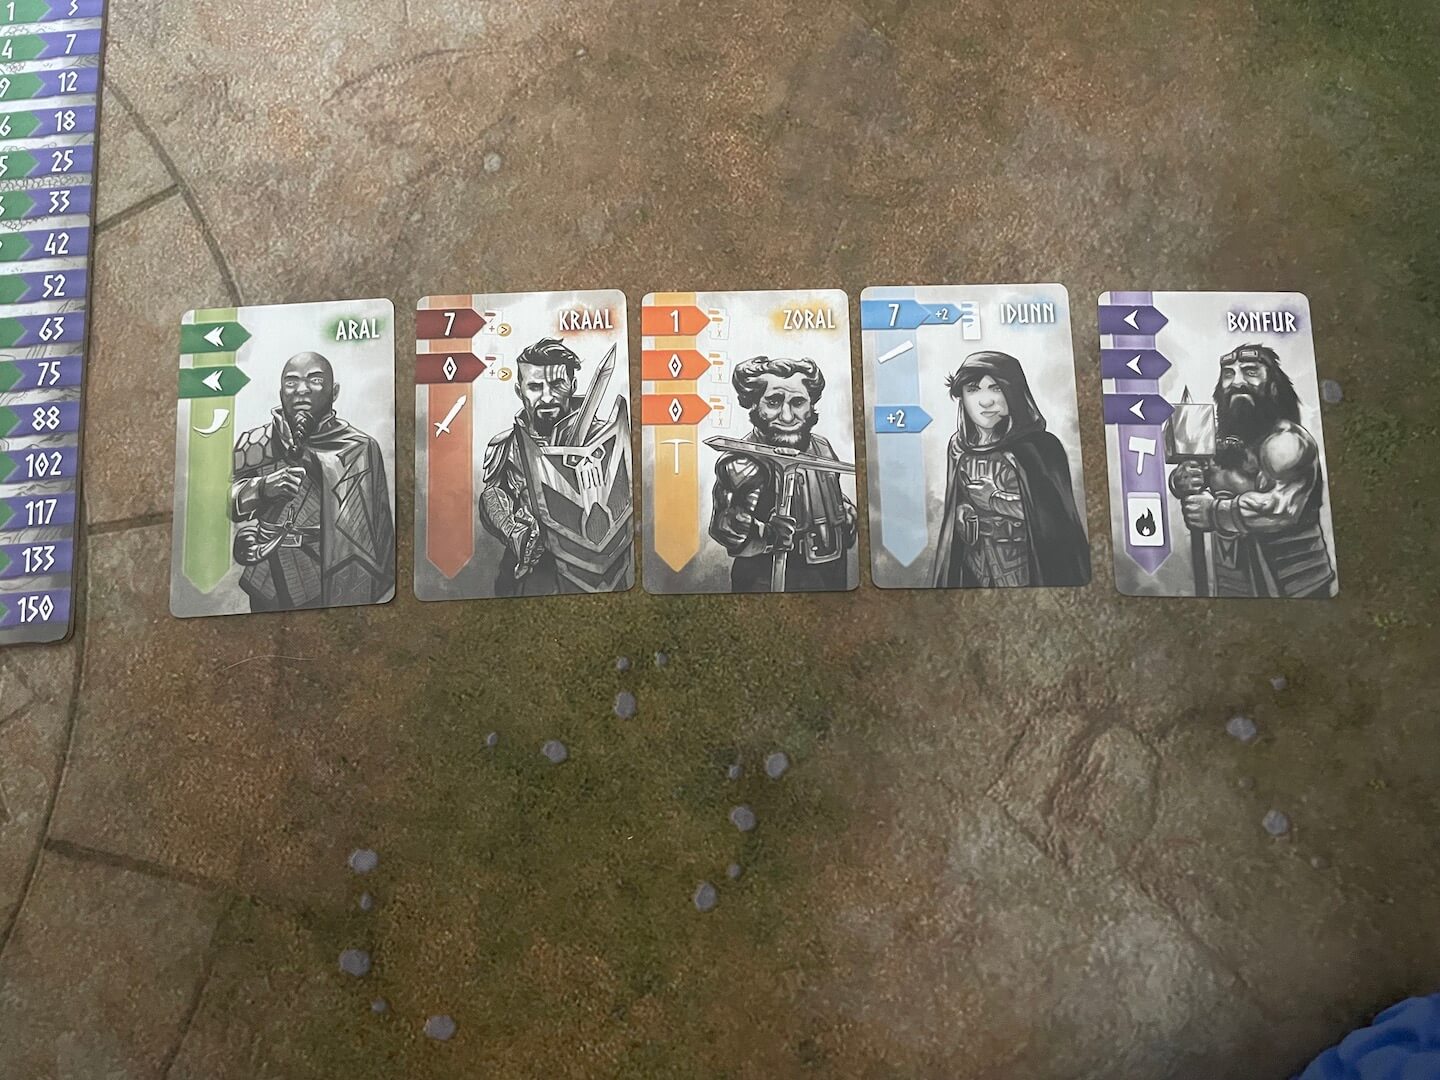 An image of hero cards from our Nidavellir review